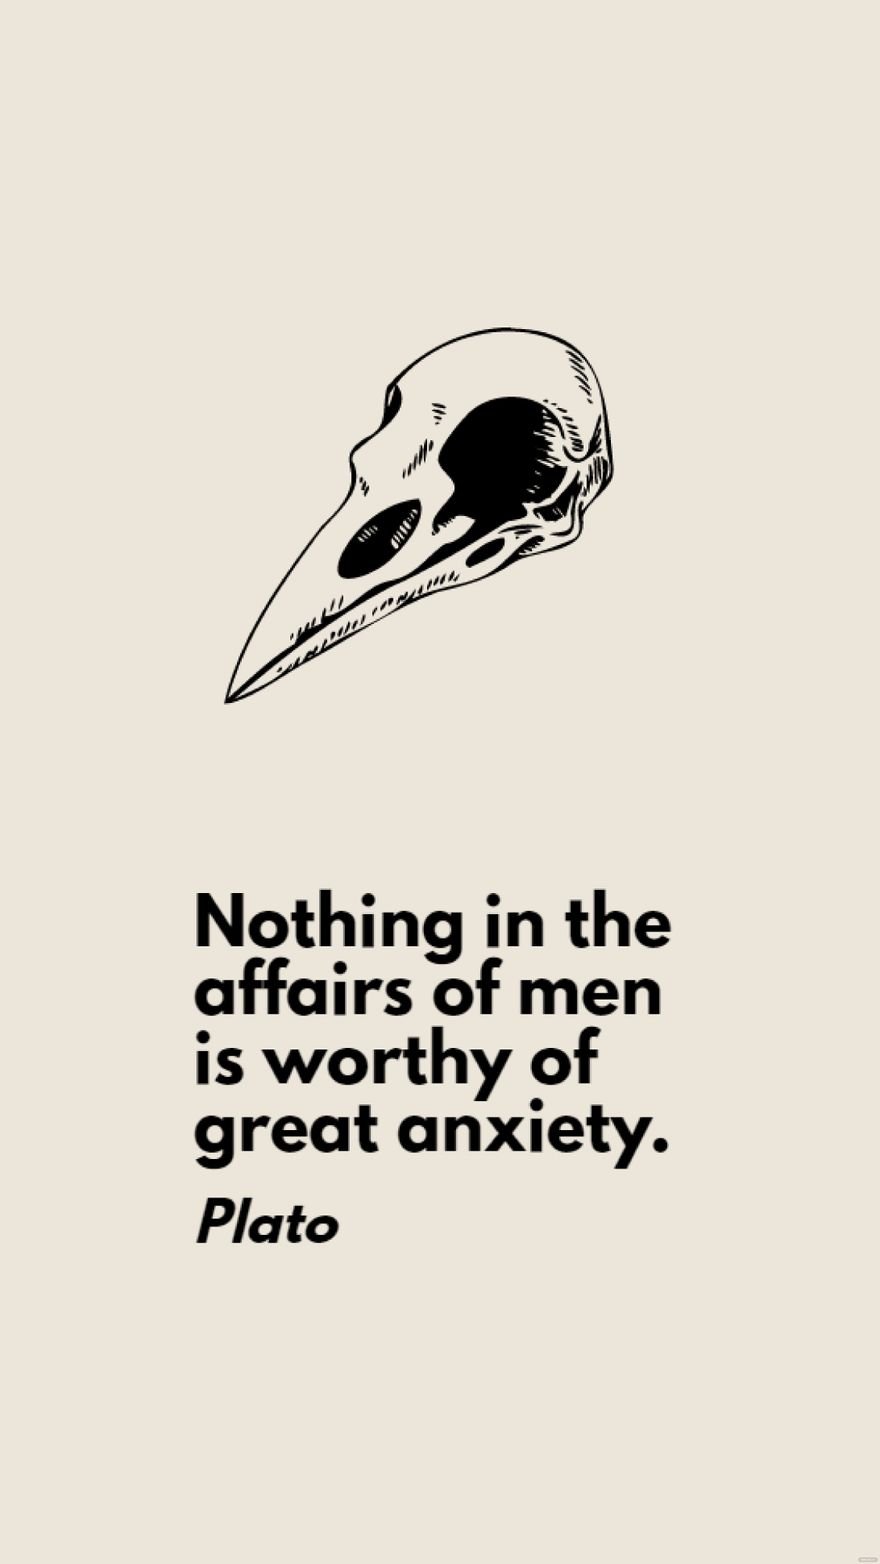 Plato - Nothing in the affairs of men is worthy of great anxiety.